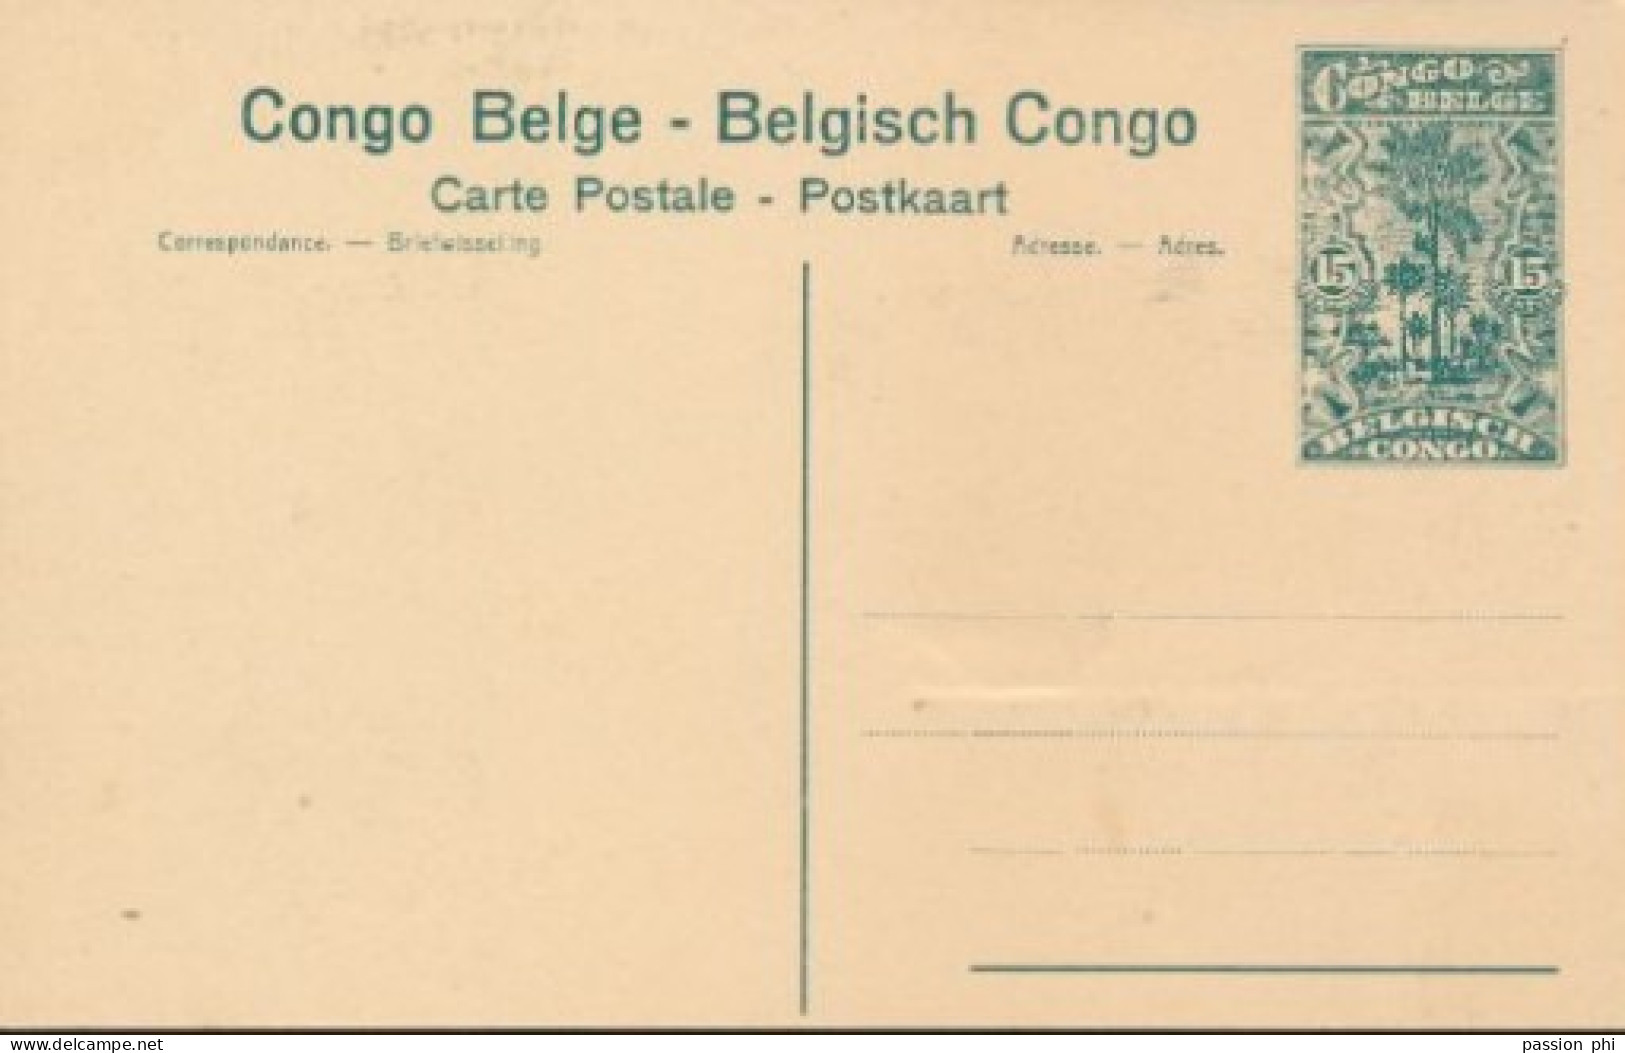 BELGIAN CONGO PPS SBEP 61 VIEW 83 UNUSED - Stamped Stationery